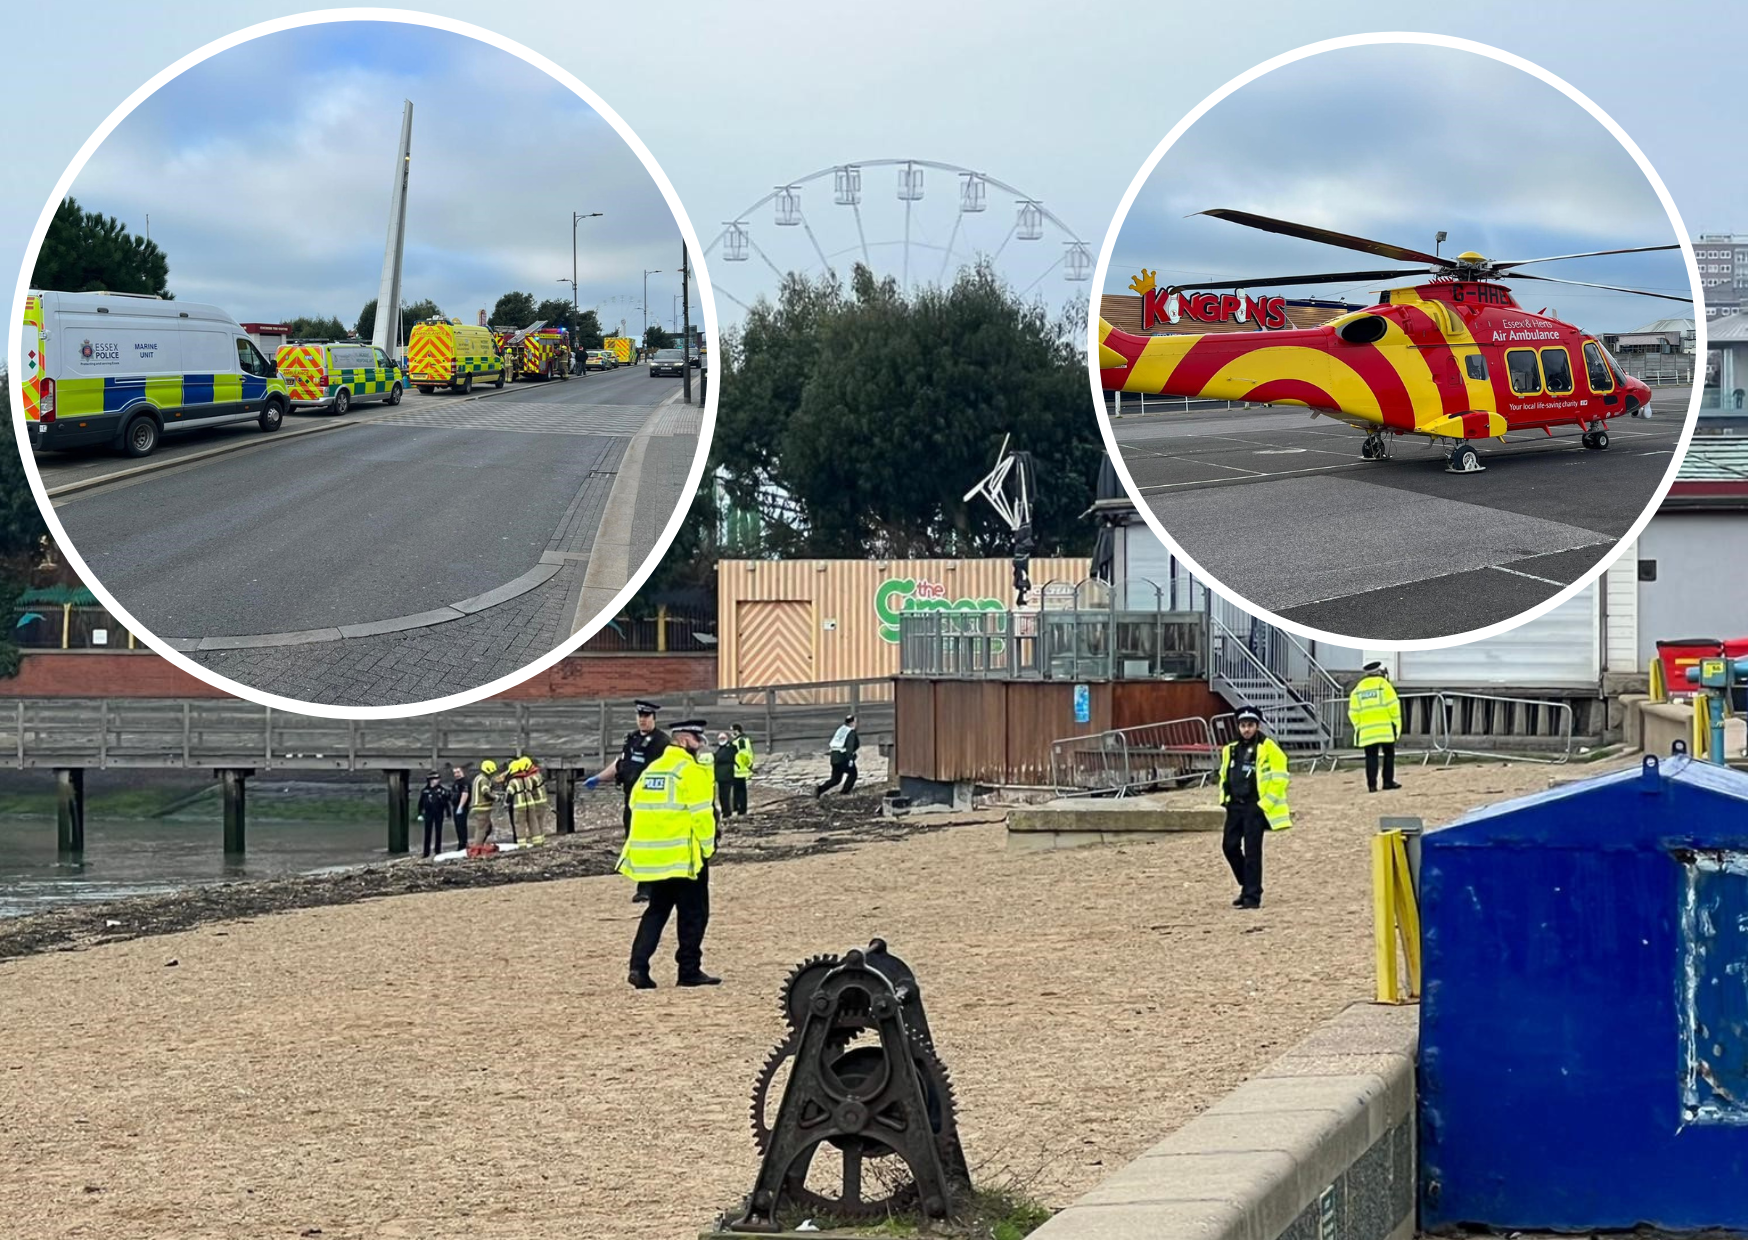 Essex seafront sees man found dead after welfare concerns raised